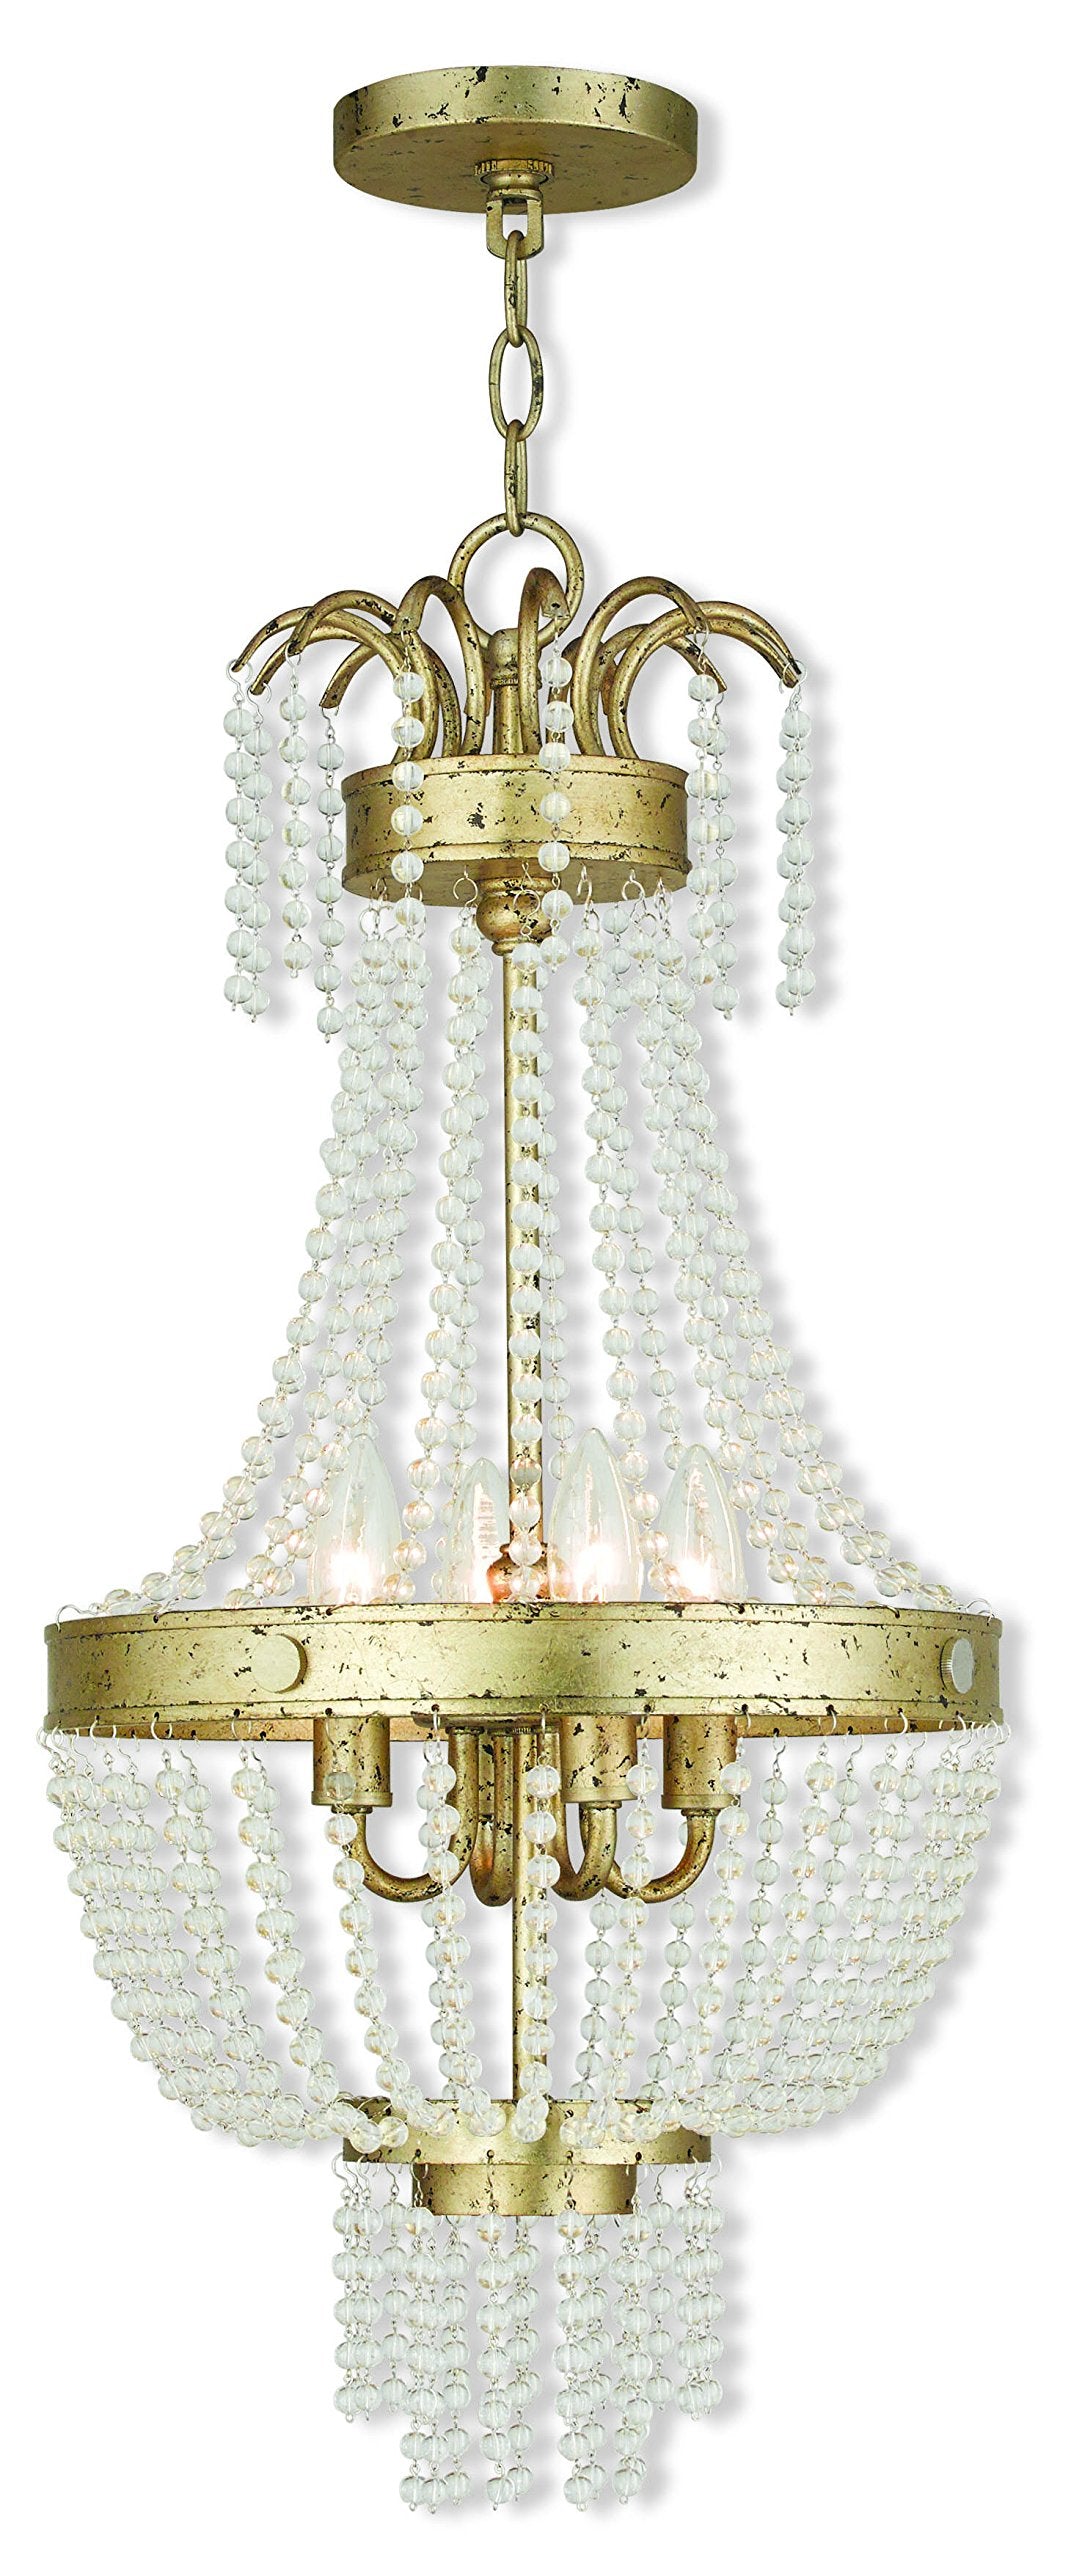 Livex Lighting 51854-28 Crystal Four Light Pendant from Valentina Collection, Champ, Gld Leaf Finish, Hand Applied Winter Gold